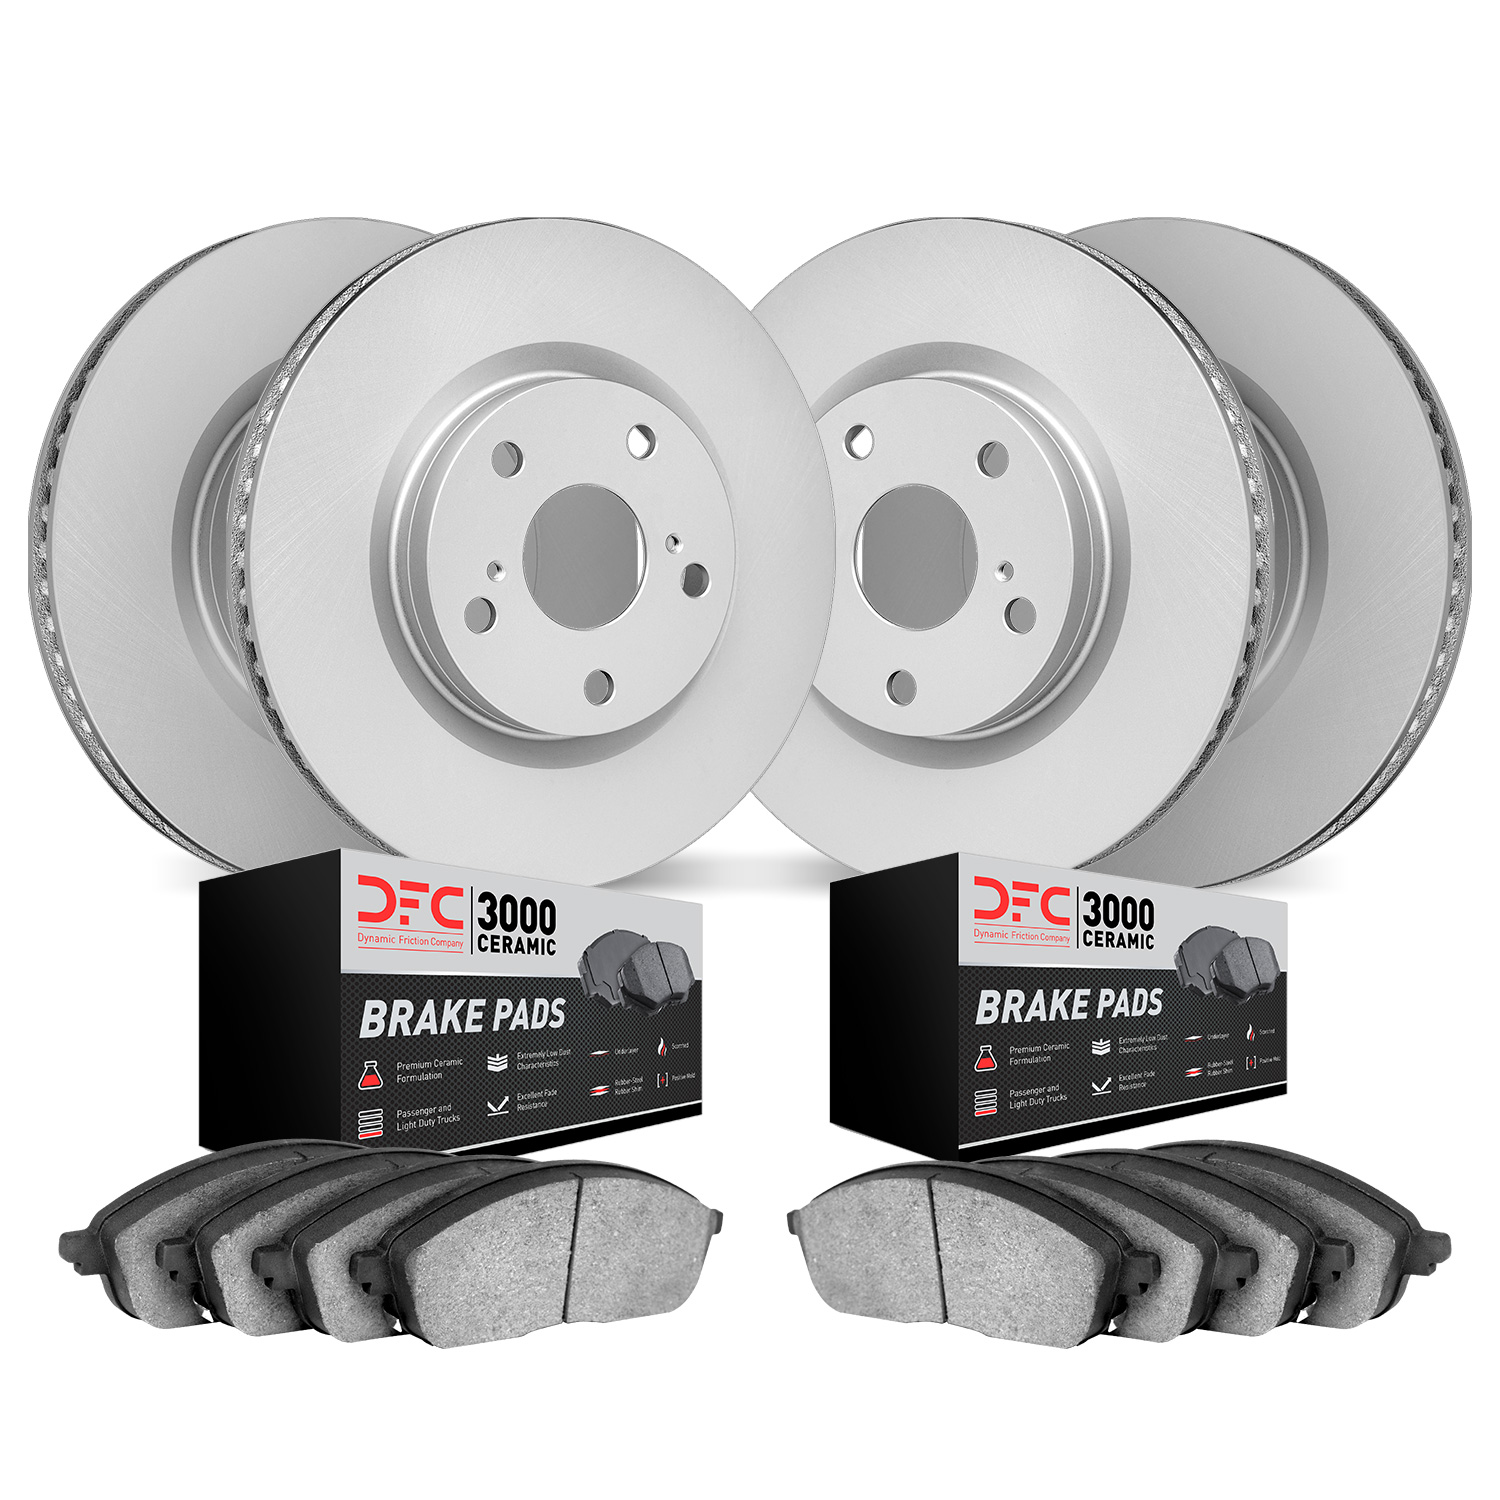 4304-67045 Geospec Brake Rotors with 3000-Series Ceramic Brake Pads Kit, 2014-2017 Infiniti/Nissan, Position: Front and Rear